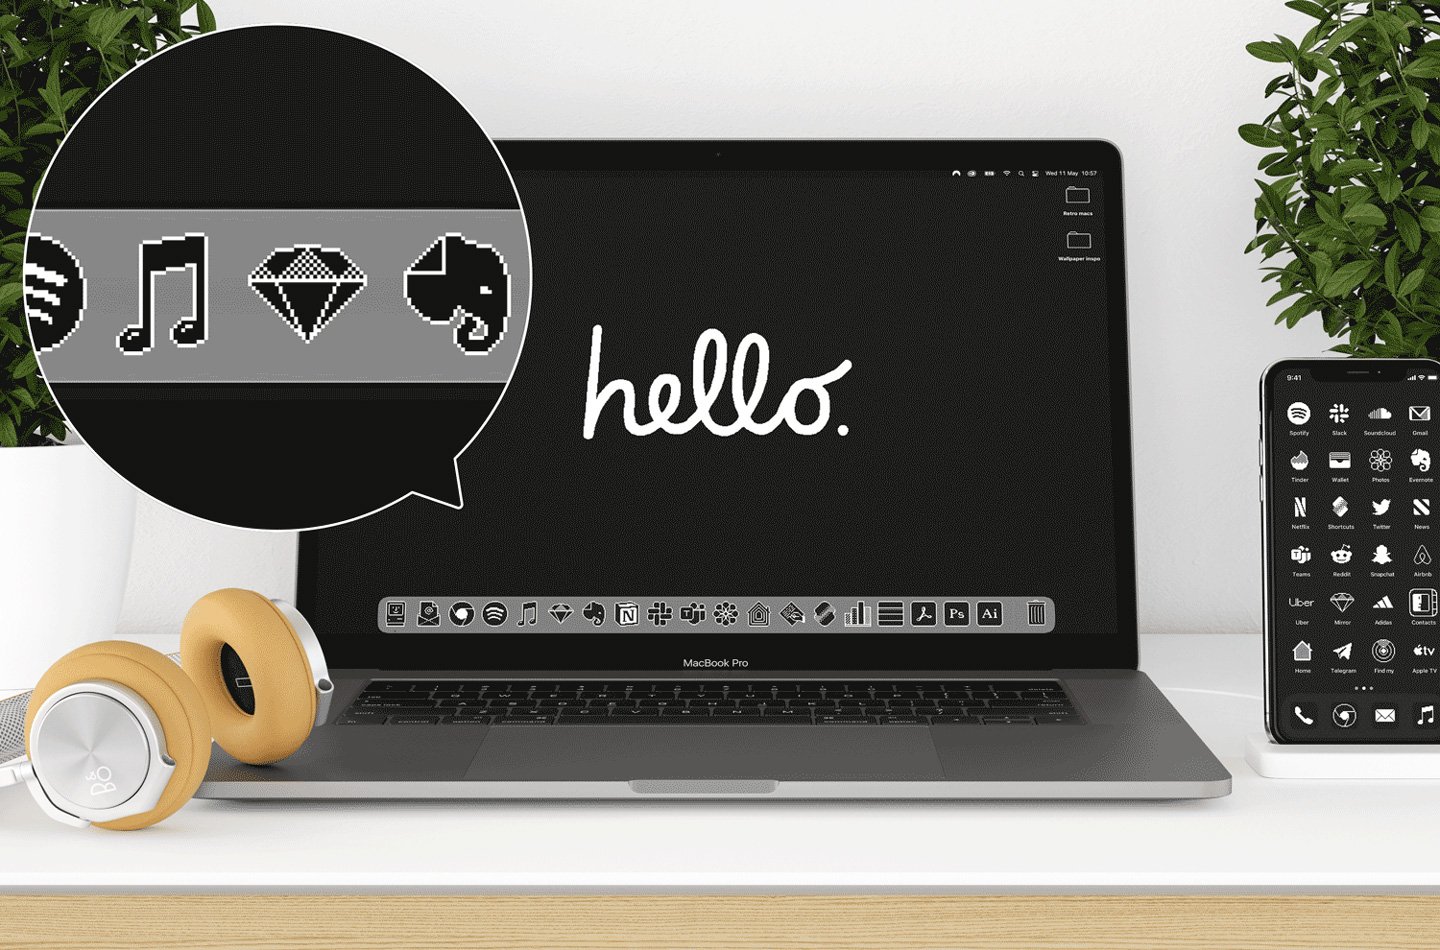 Retro Macintosh Theme with icons gives your MacBook a vintage 1984 Apple vibe!